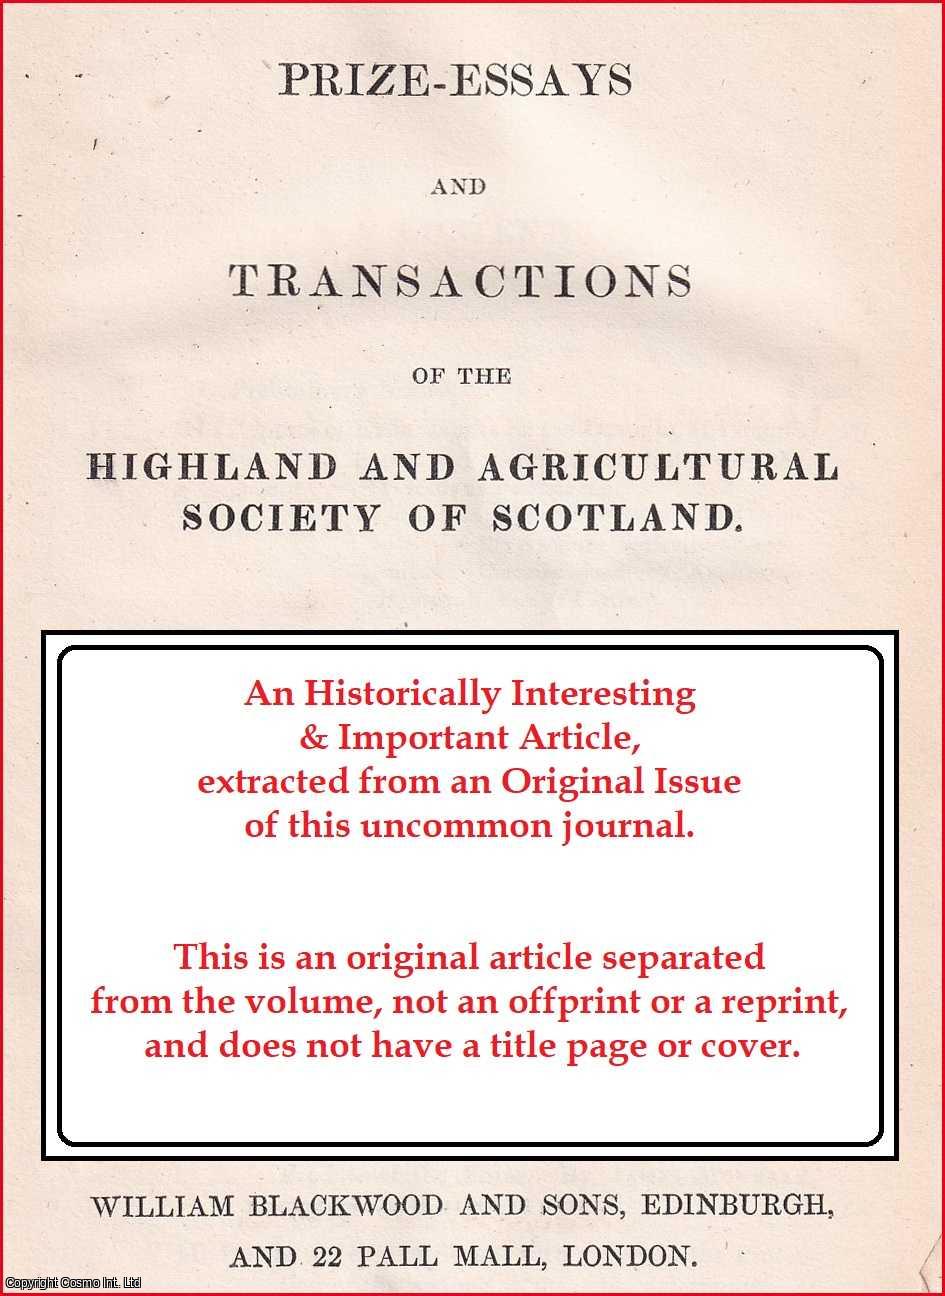 Mr. John Mitchell Merchant, Leith. - The Dairy Husbandry in Holland. An uncommon original article from the Prize Essays and Transactions of the Highland Society of Scotland, 1835.